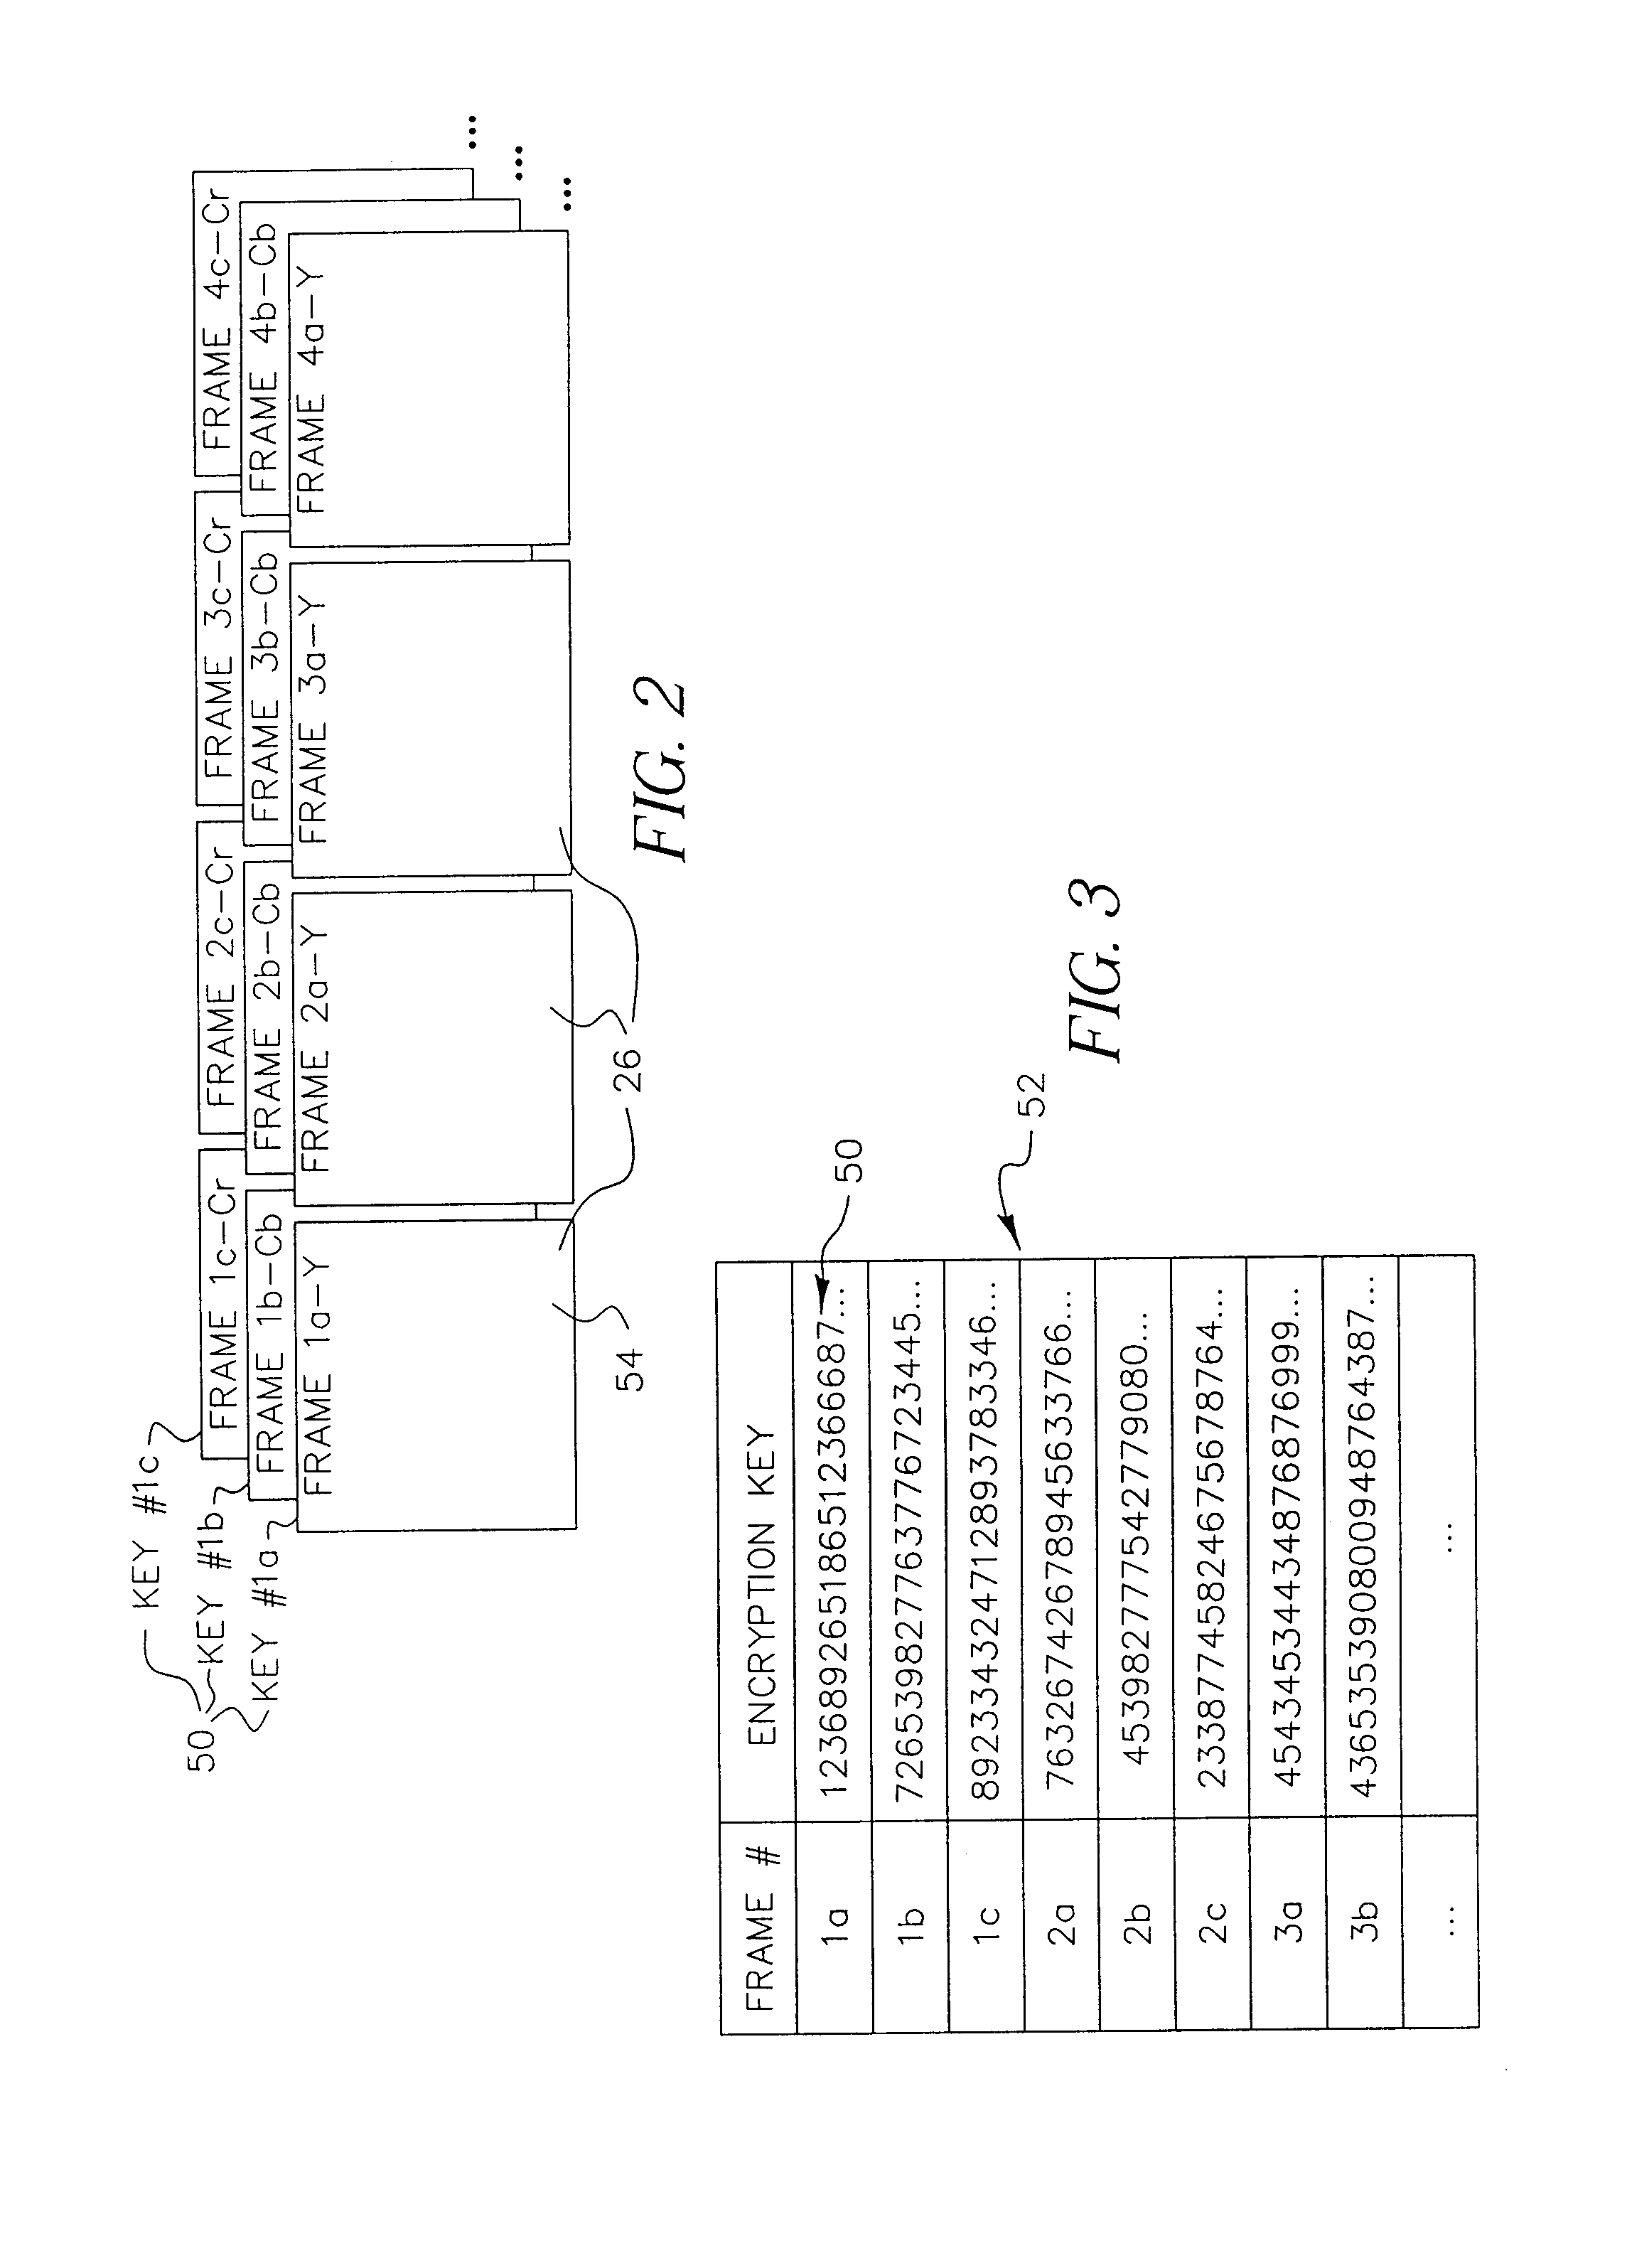 Encryption apparatus and method for synchronizing multiple encryption keys with a data stream